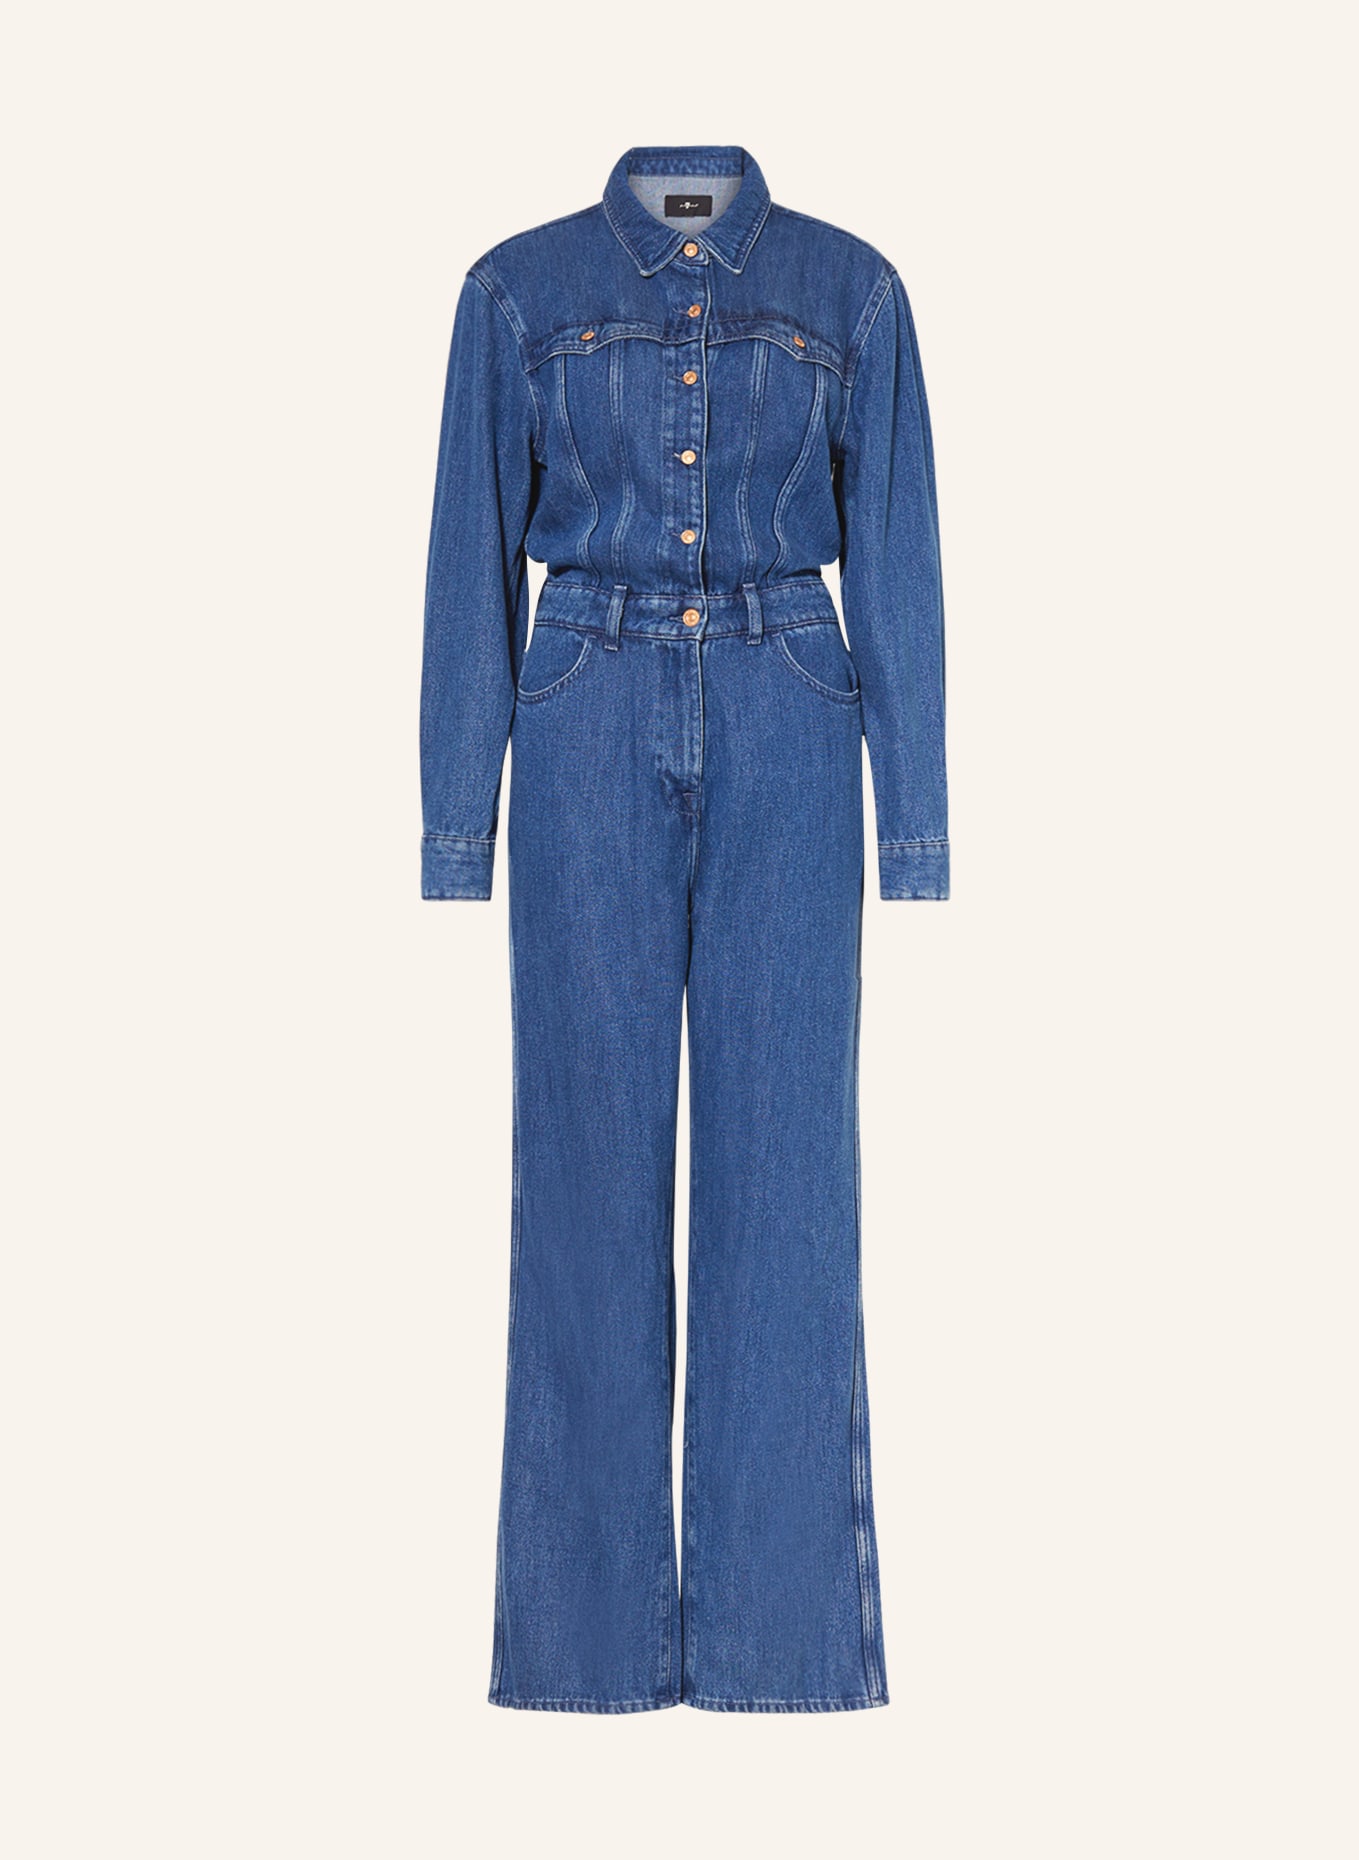 7 for all mankind Jeans-Jumpsuit DOLLY, Farbe: DARK BLUE (Bild 1)